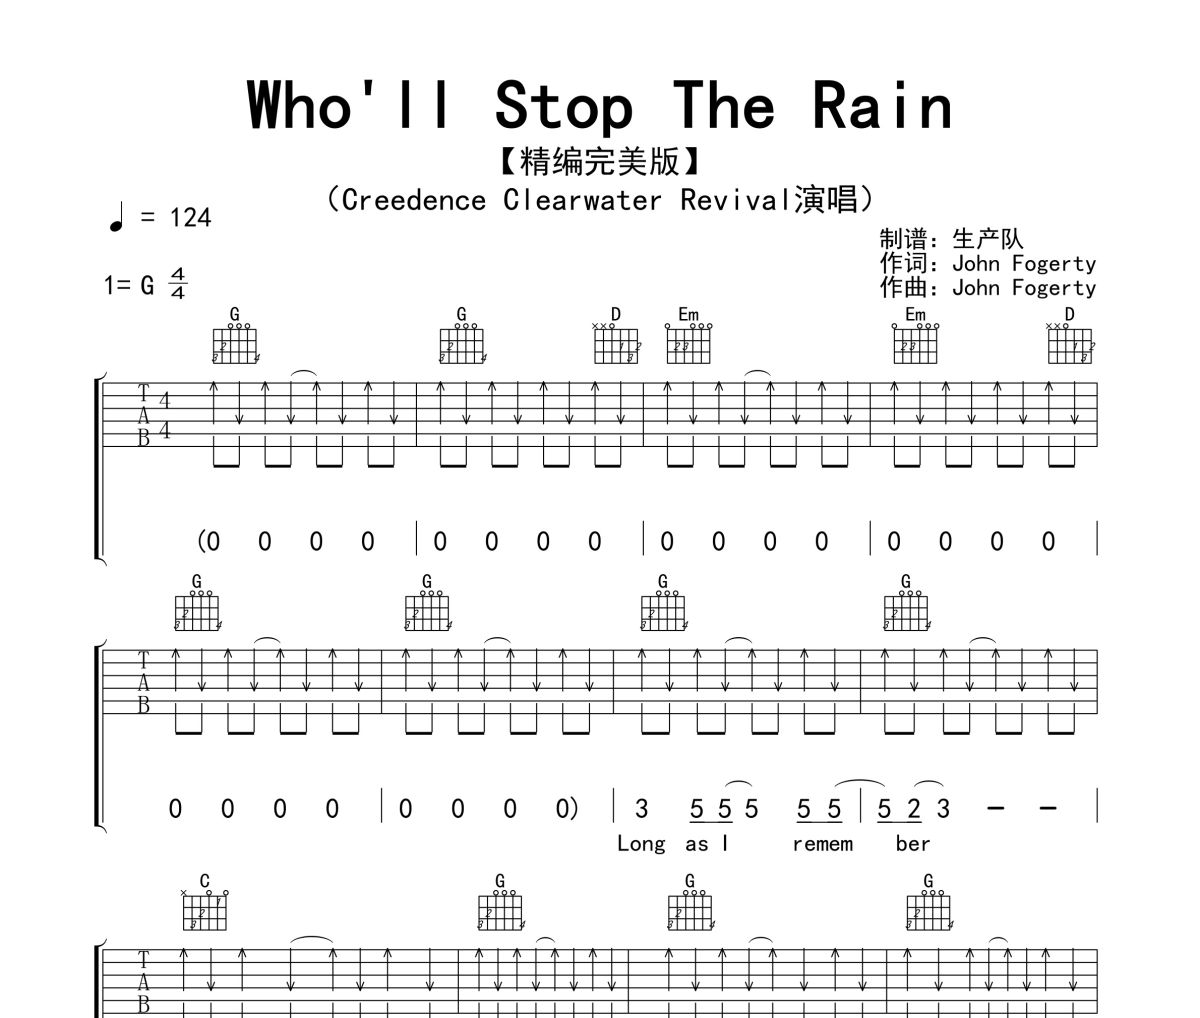 Who'll Stop The Rain吉他谱 Creedence Clearwater Revival《Who'll 